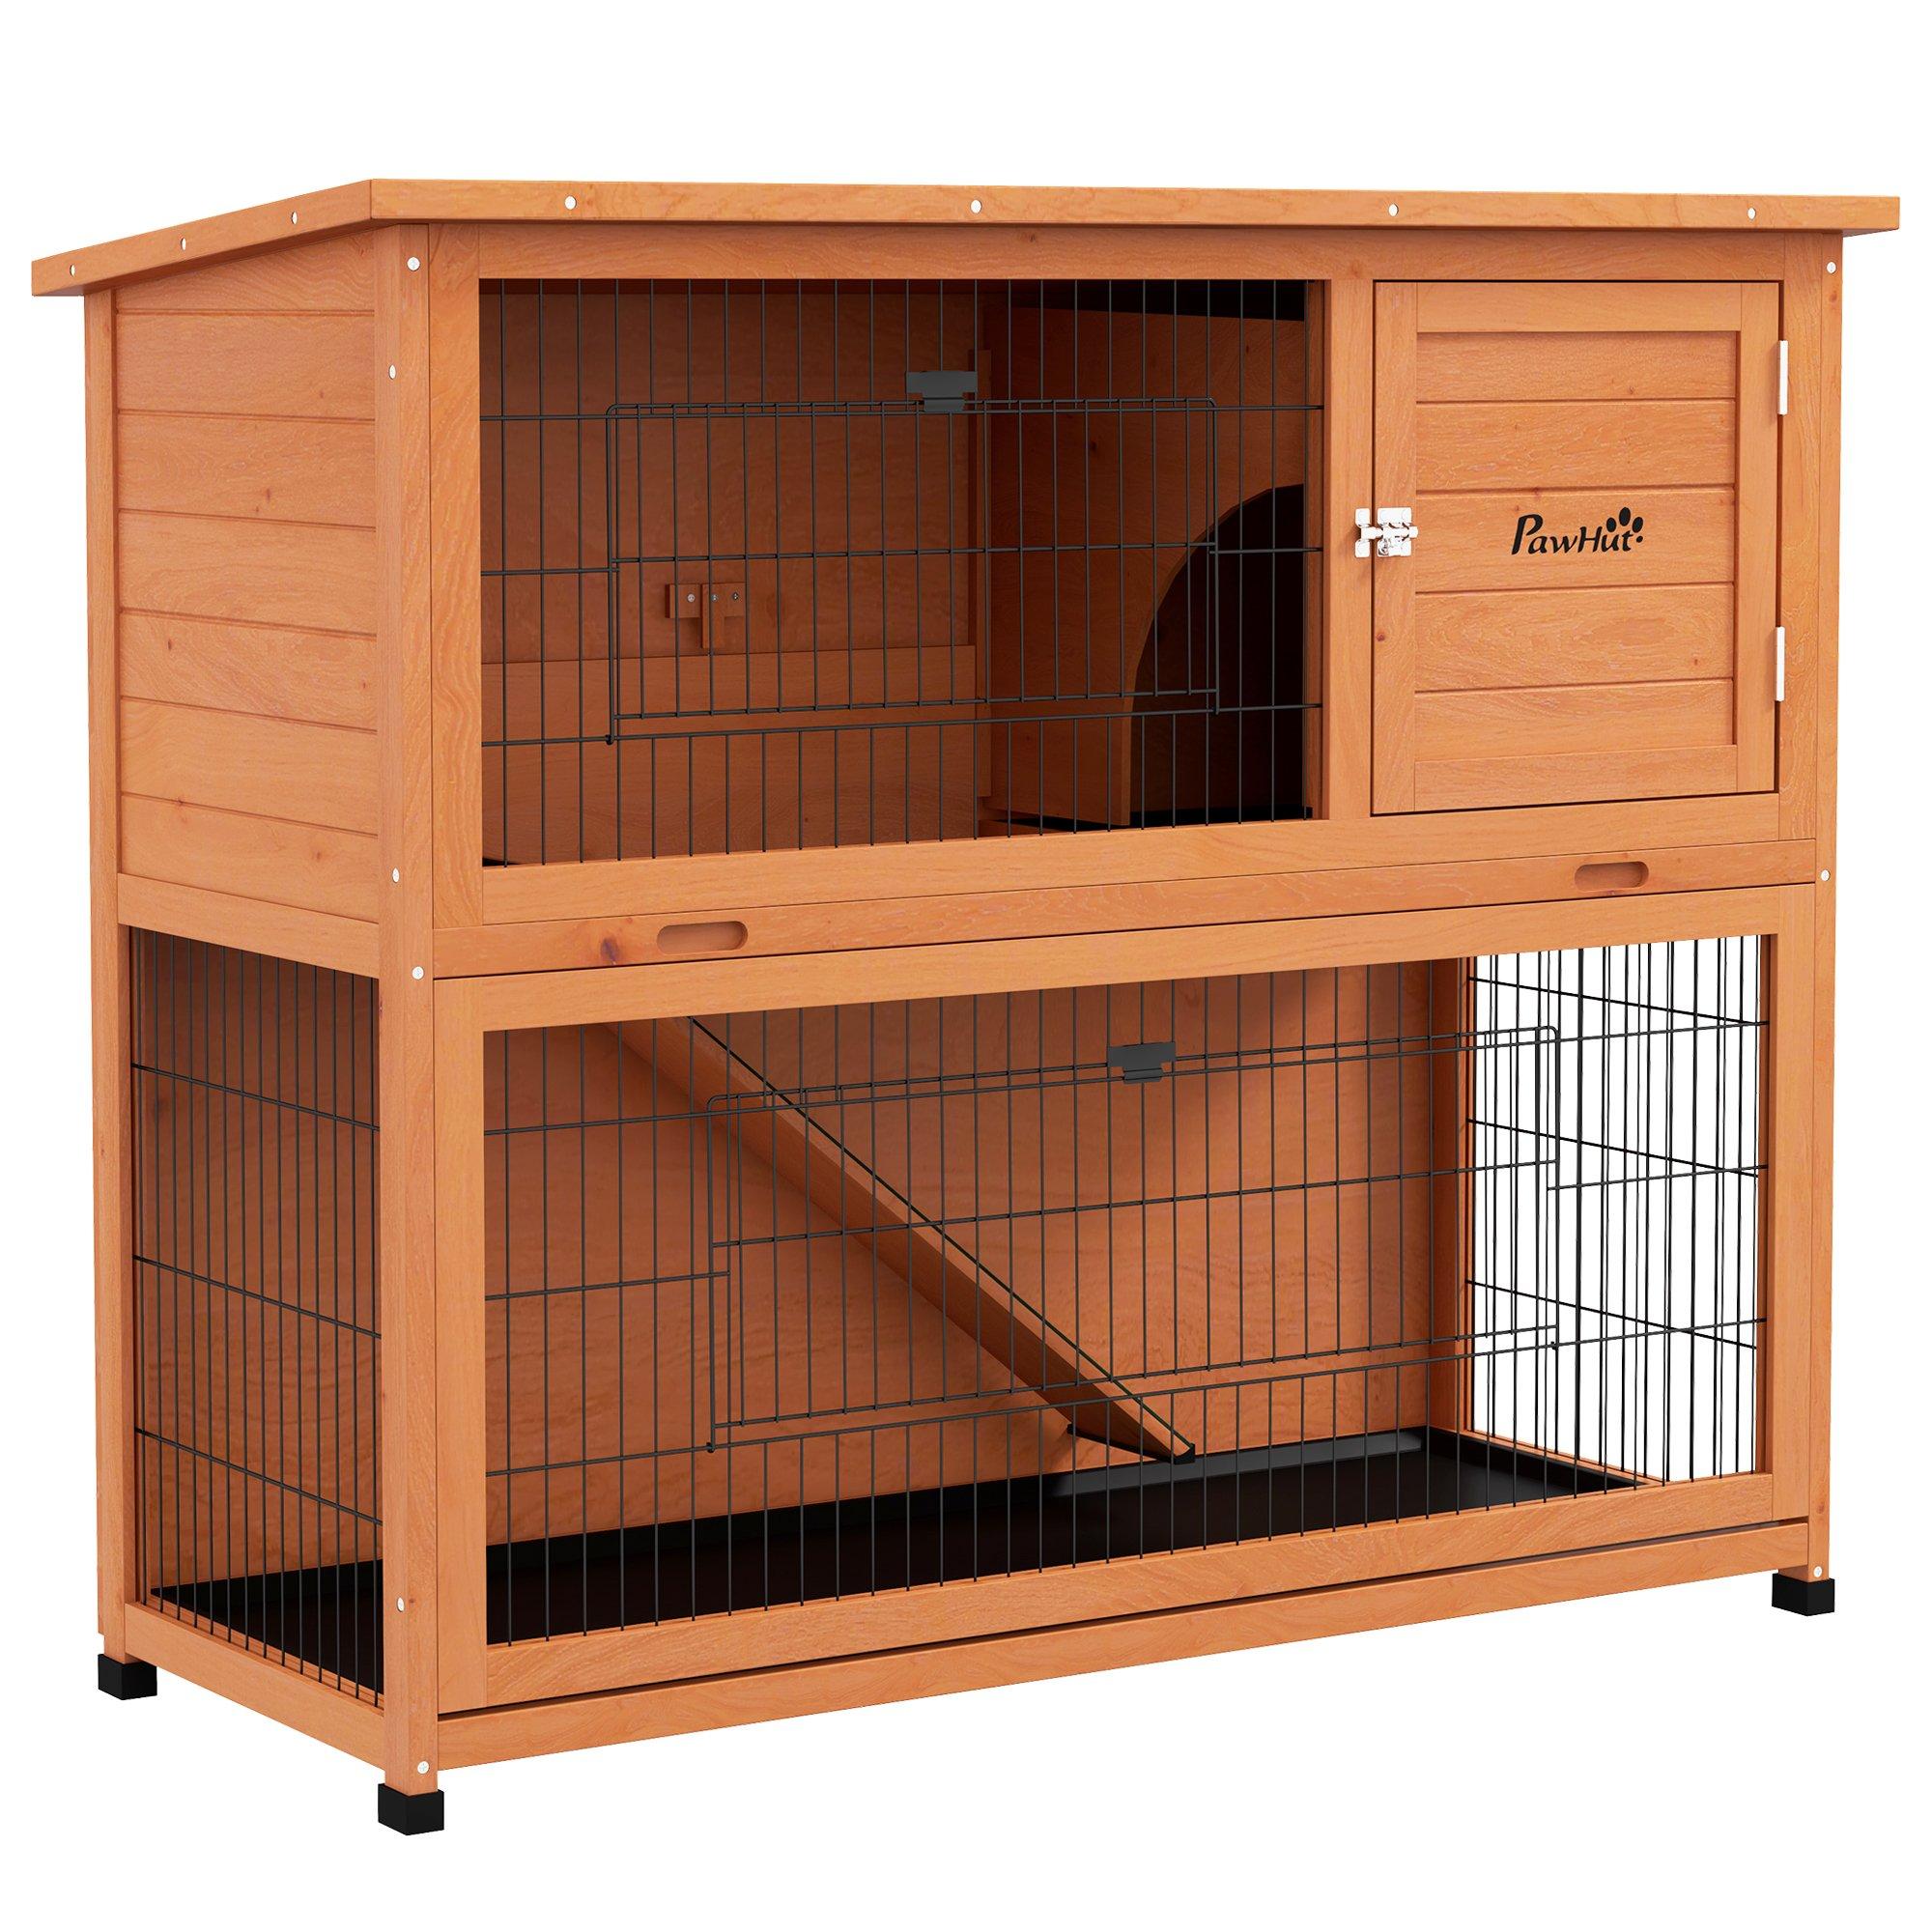 Two-Tier Rabbit Hutch, 102cm Cage with Run, Doors, Tray, Ramp, Asphalt Roof